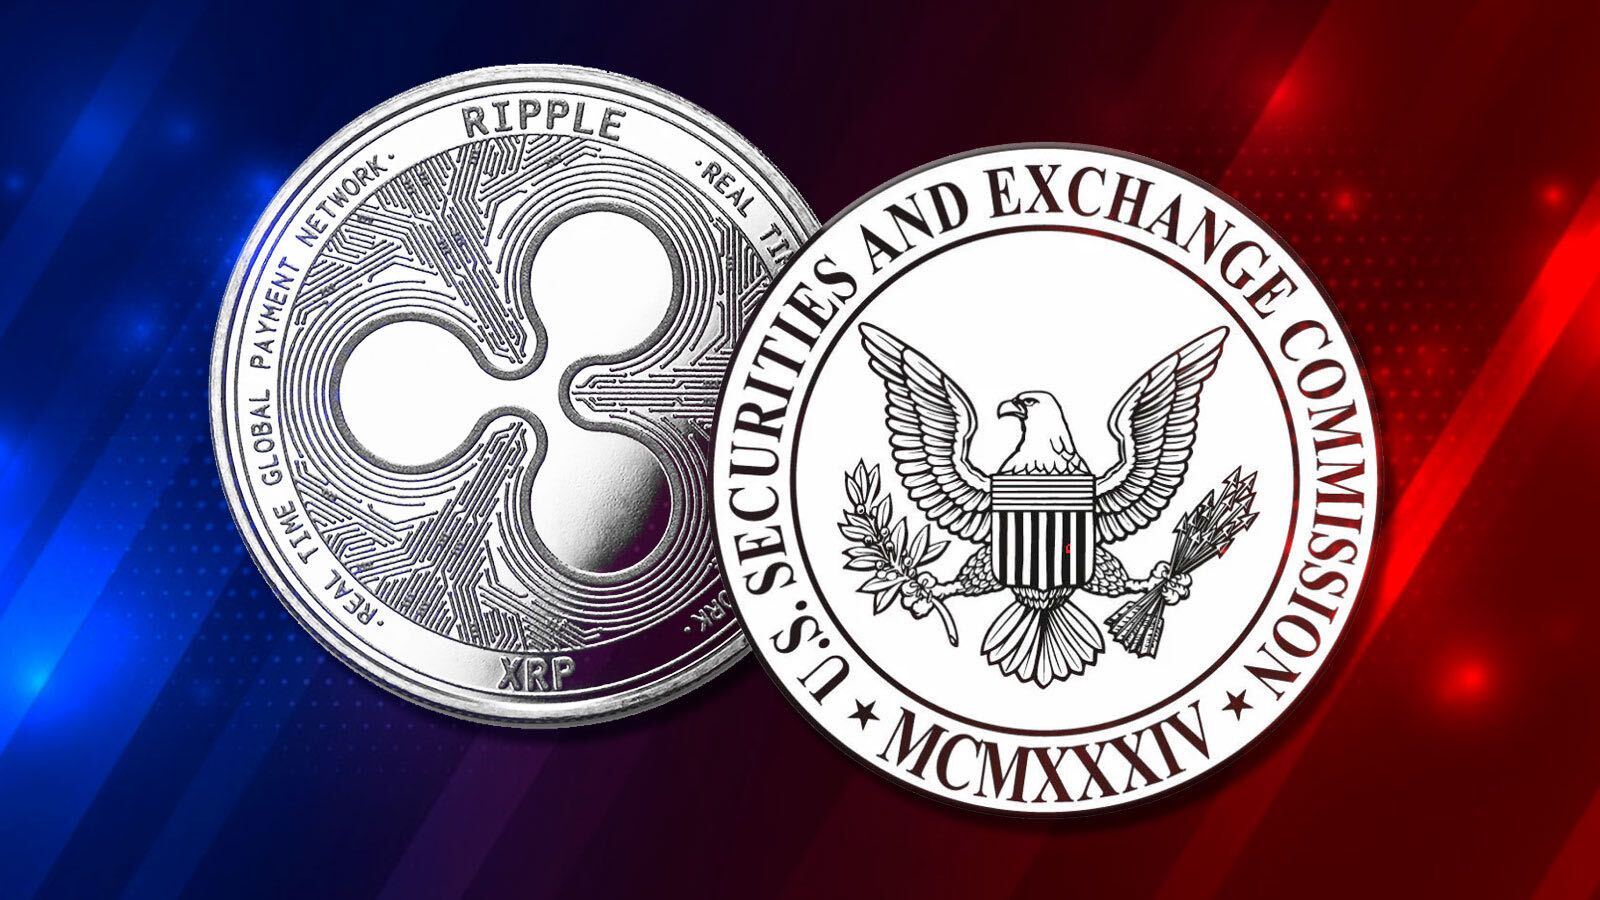 SEC v. XRP: Lawyer Explains How Chamber of Digital Commerce Will Help Ripple & XRP